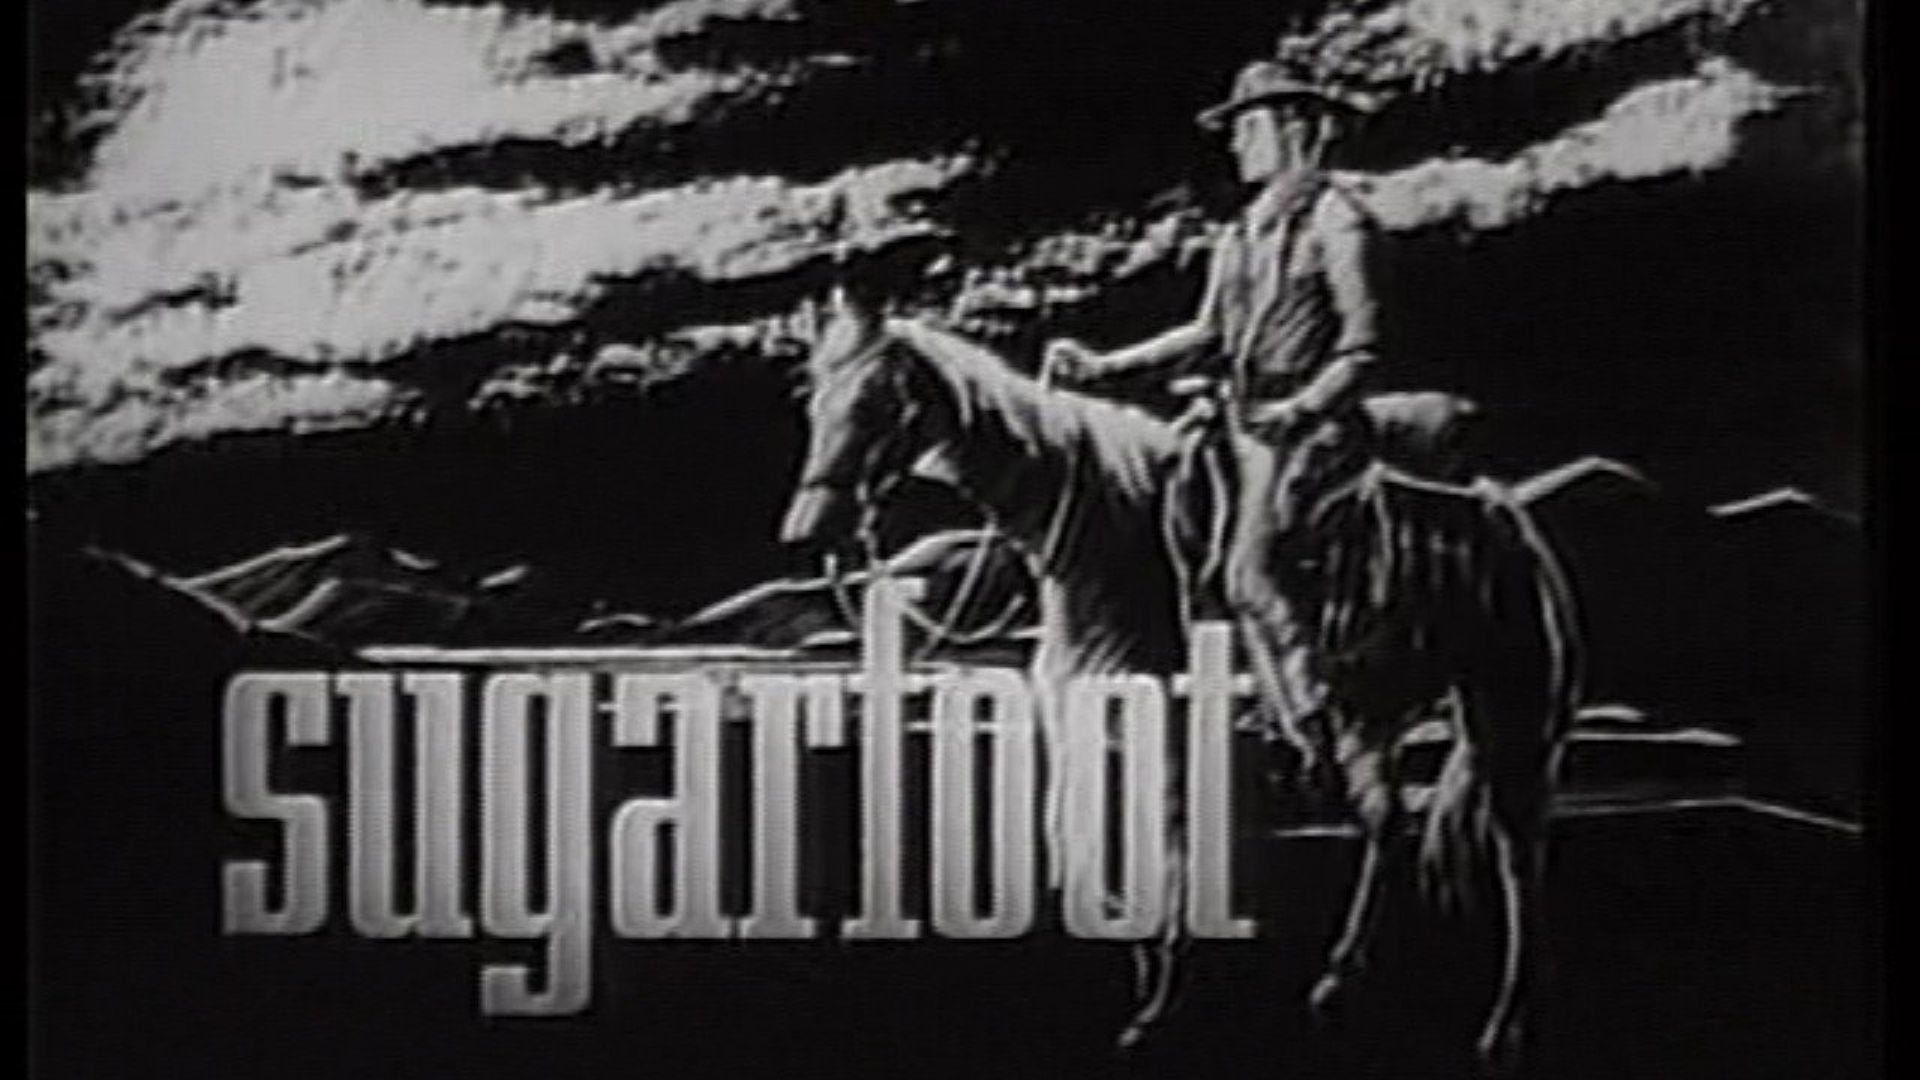 Sugarfoot The Complete First Season 